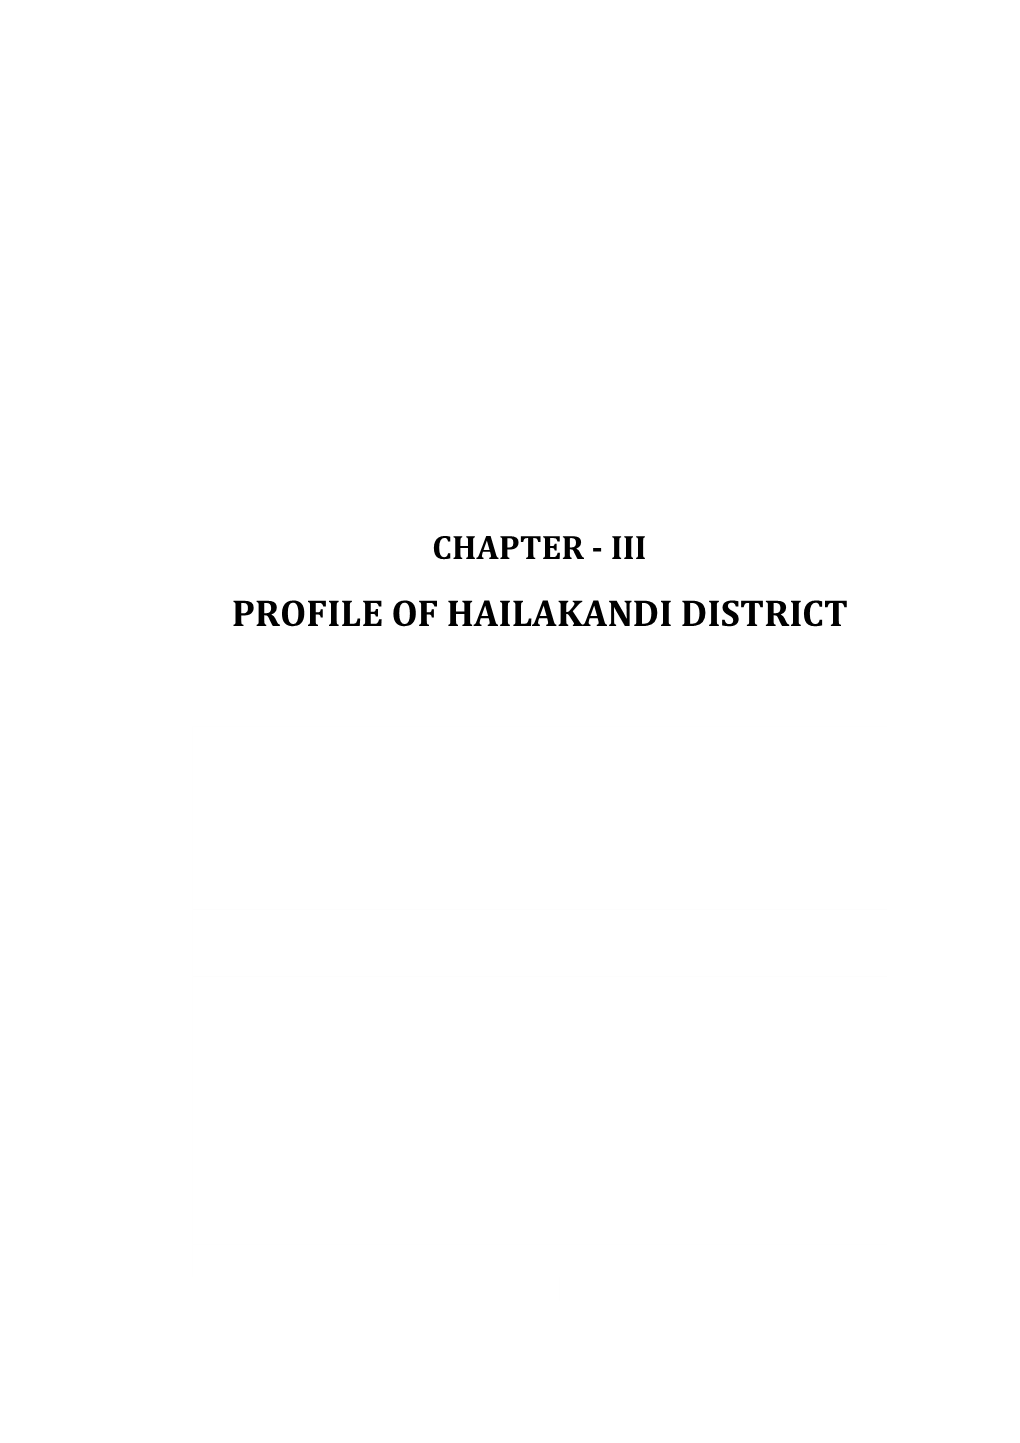 Agricultural Profile of Hailakandi District  Credit Delivery System  Details of Financial Parameters of Major Credit Institutions of Hailakandi District